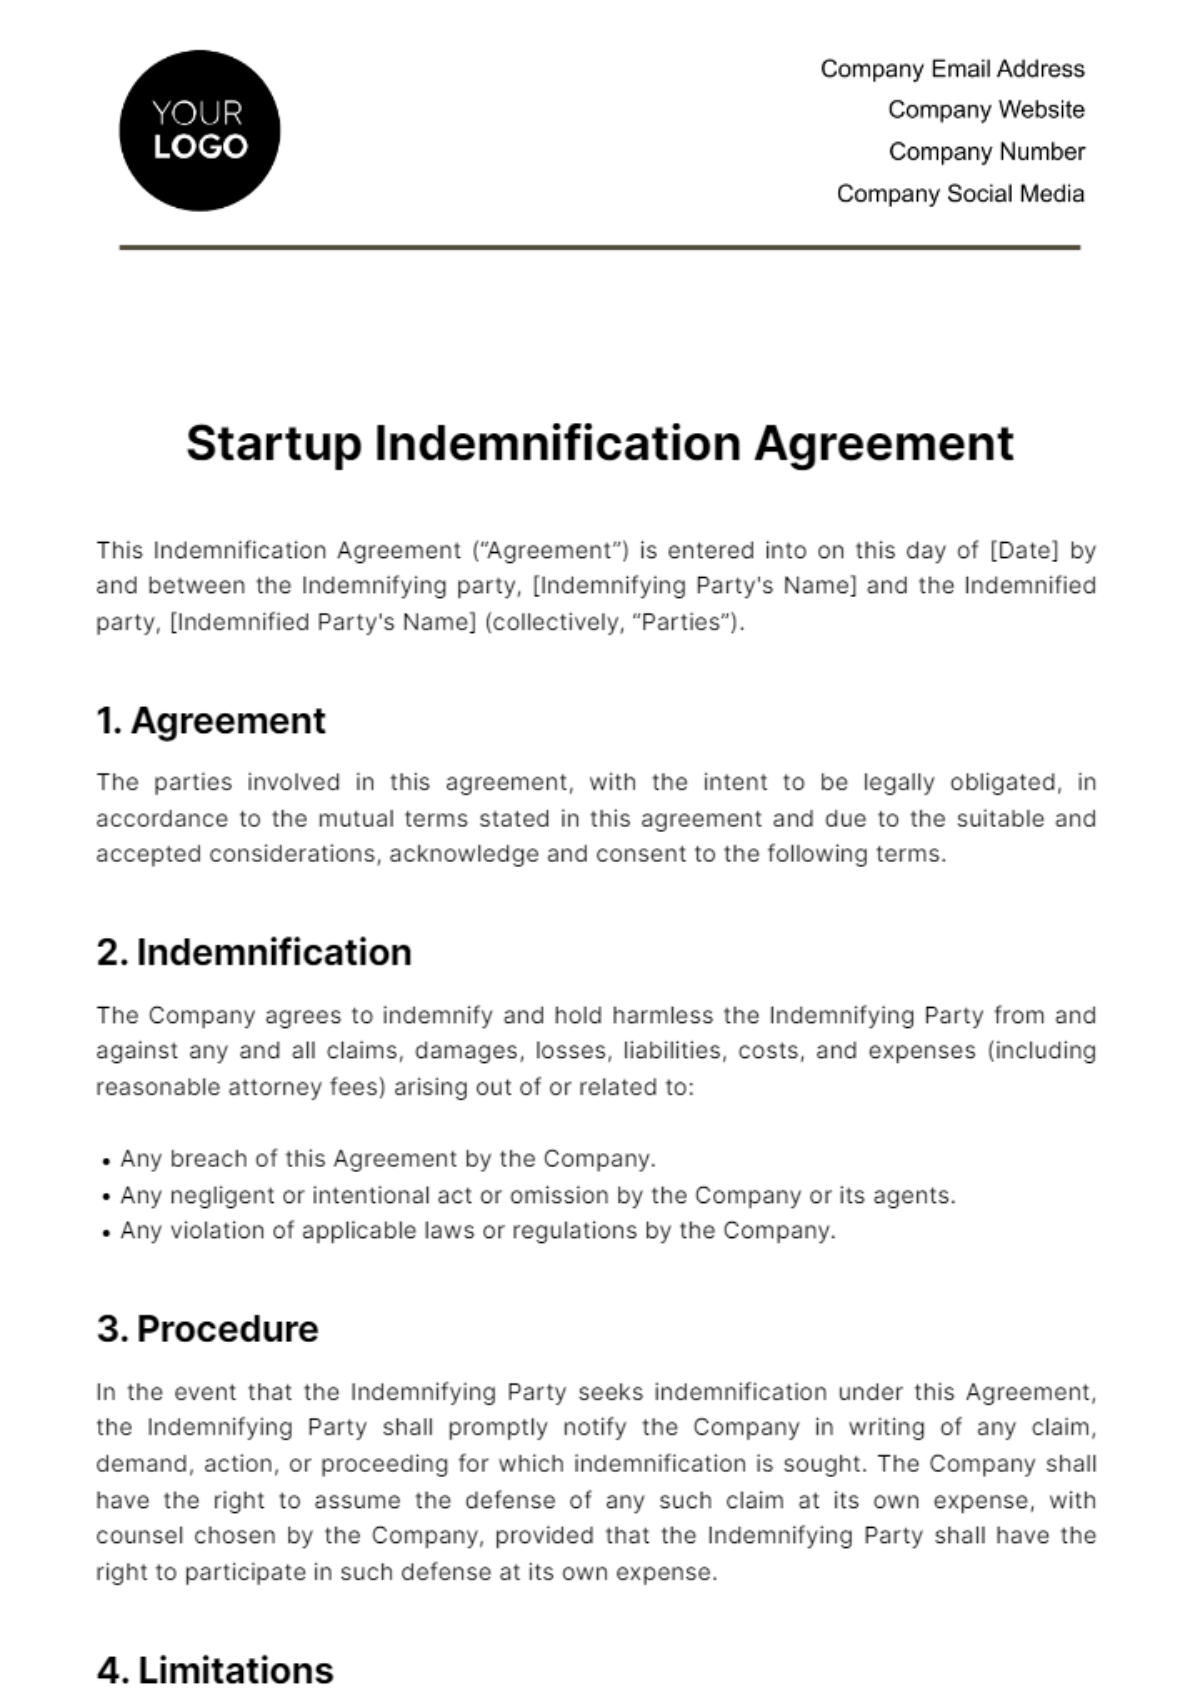 Free Startup Indemnification Agreement Template